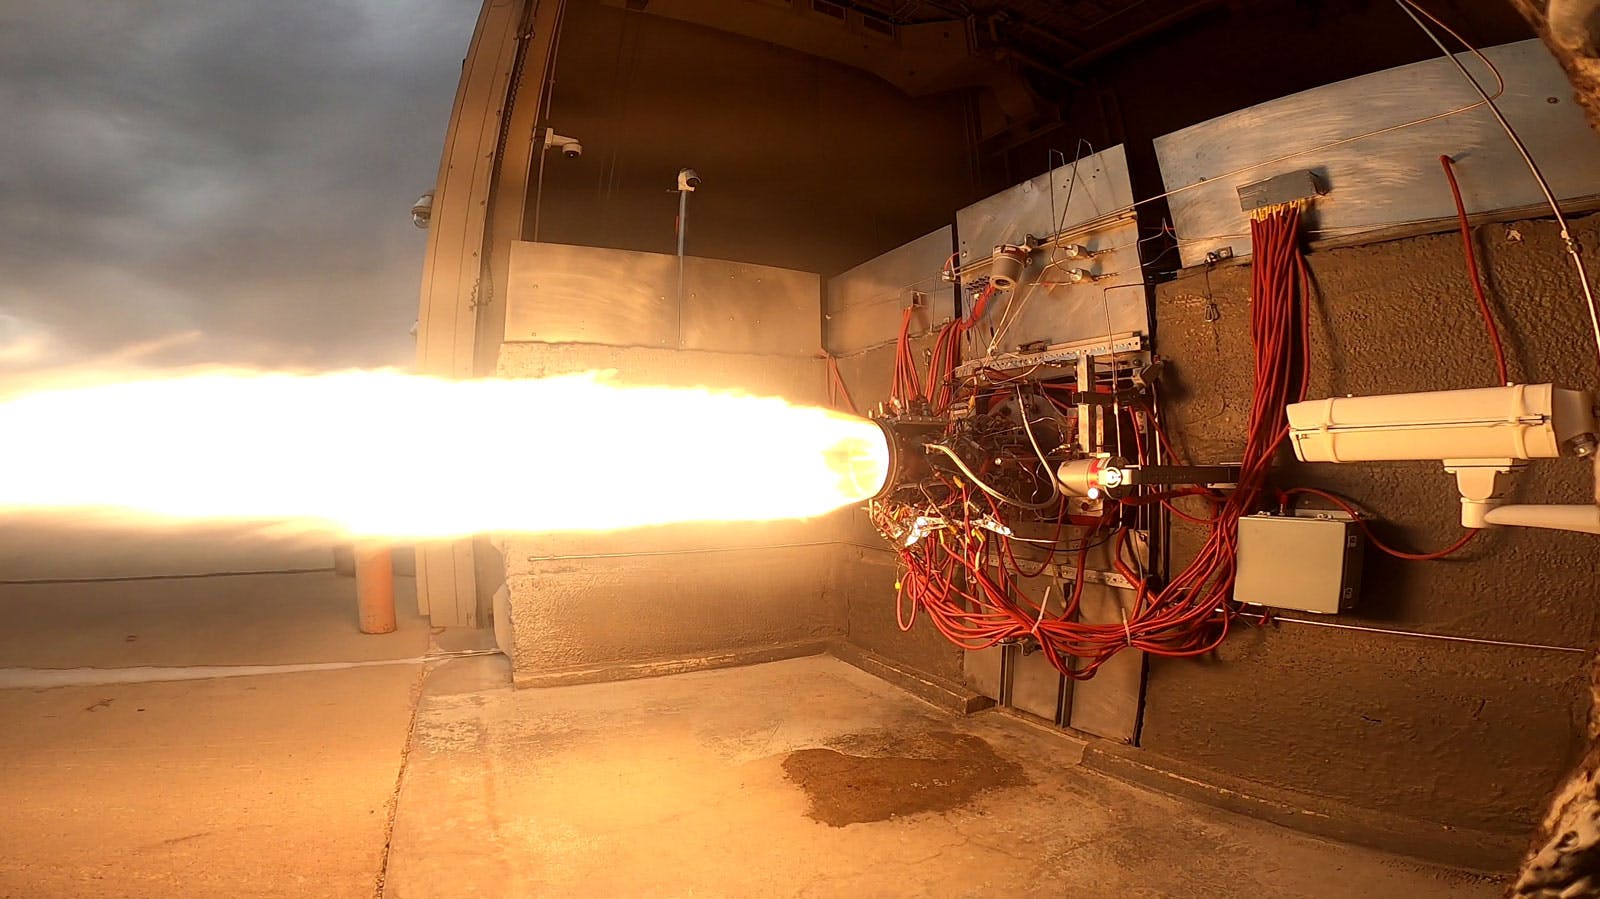 Hotfiring of a Hadley engine with a copper chamber printed at Ursa Major's Advanced Manufacturing Lab.